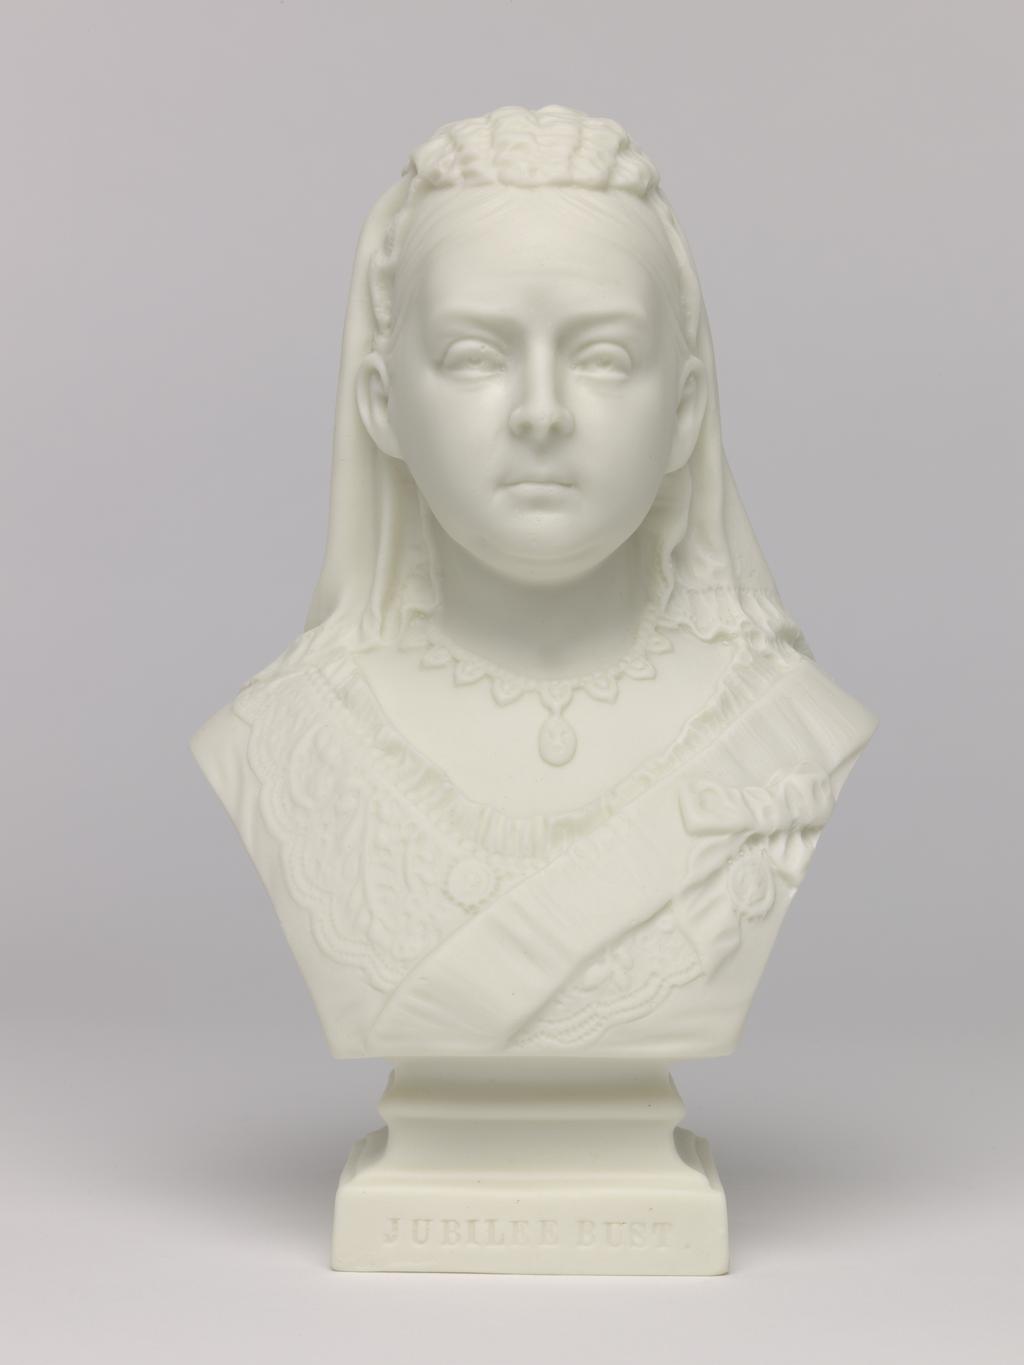 An image of Bust. Queen Victoria (1819-1901). Turner & Wood, Staffordshire, Stoke-on-Trent. Unidentified sculptor. Parian (porcelain), slip-cast, height 18 cm, length 11.2 cm, width 7.4 cm, length, base, 5.5 cm, width, base, 6.2 cm. Acquisition Credit: Accepted by H. M. Government in lieu of Inheritance Tax from the estate of G. D. V. Glynn, and allocated to the Fitzwilliam Museum.